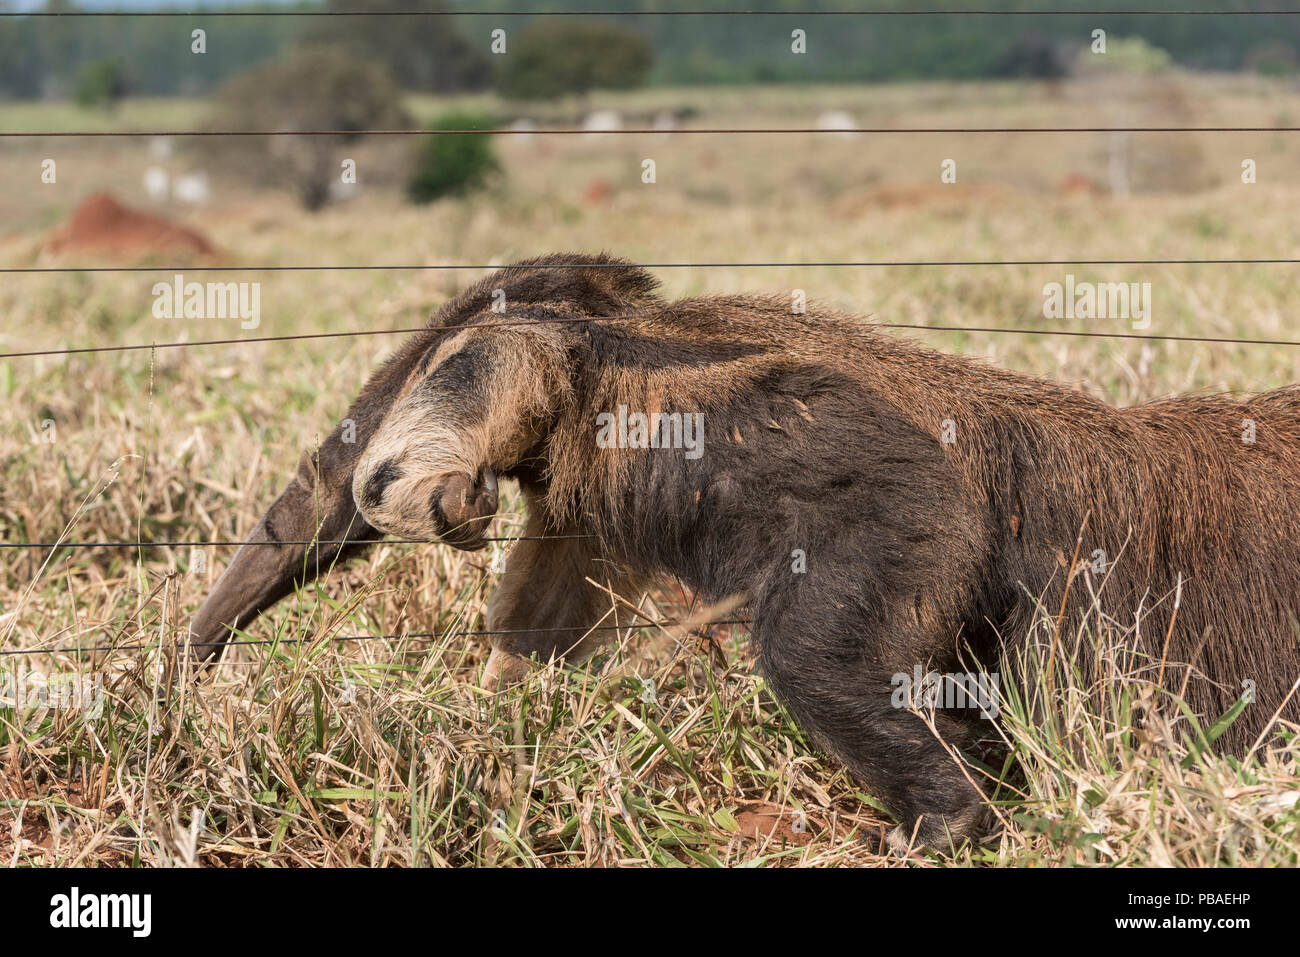 Adult Giant Anteater (Myrmecophaga tridactyla) climbing through a cattle fence. Southern Pantanal, Moto Grosso do Sul State, Brazil. September. Stock Photo